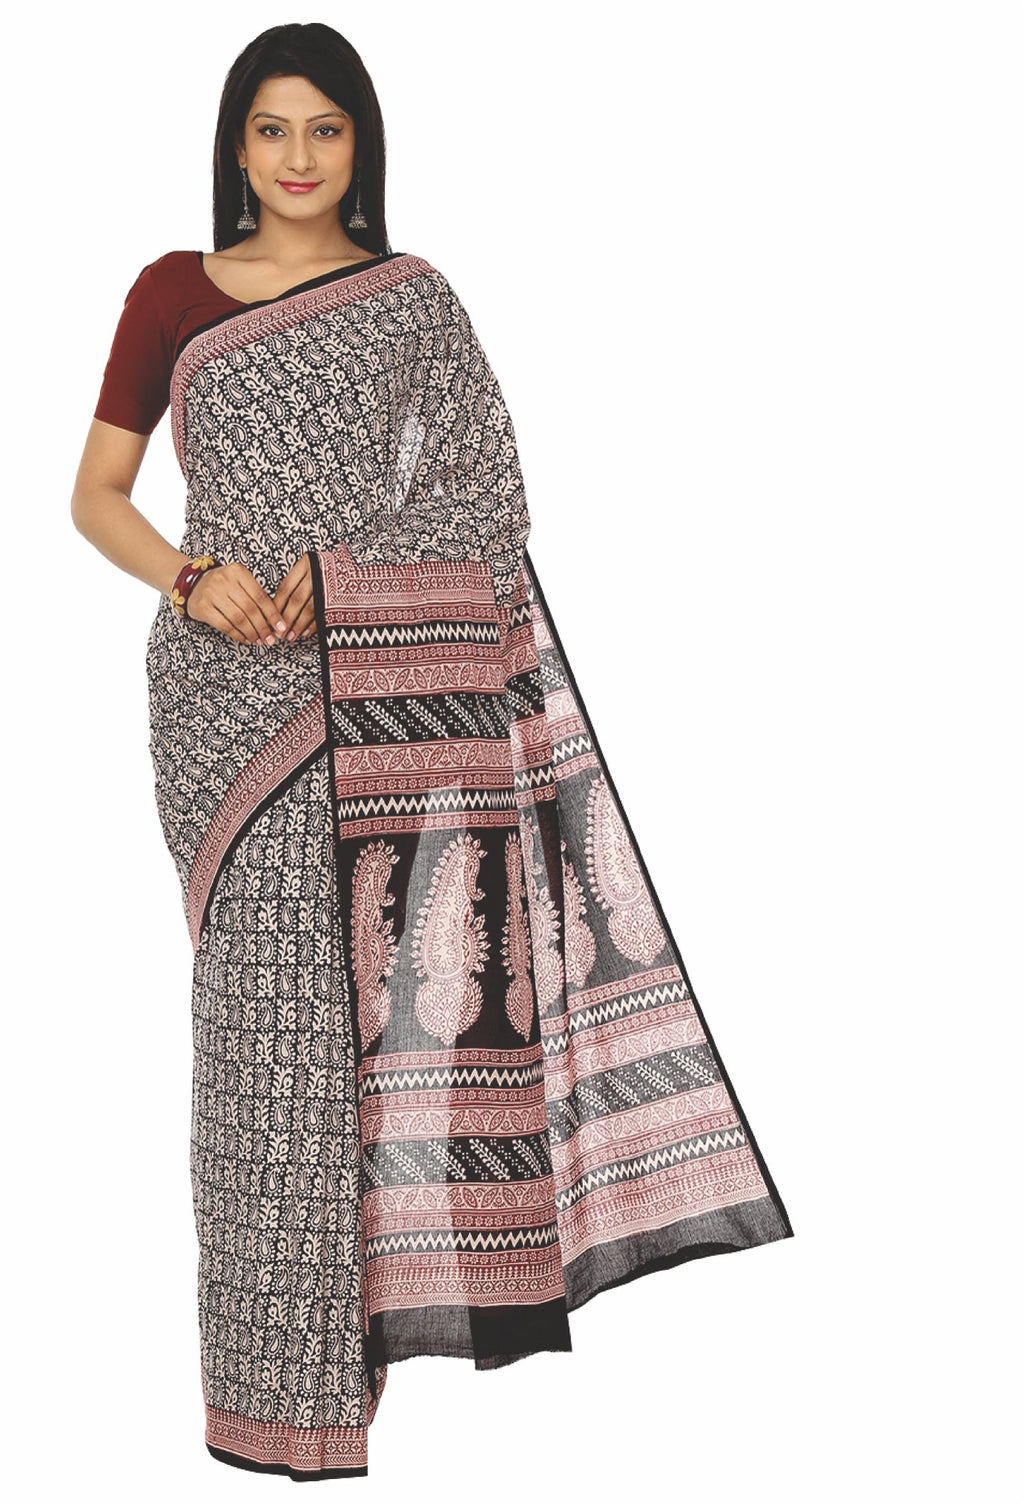 Kalakari India Black Bagh Handblock Print Handcrafted Cotton Saree-Saree-Kalakari India-ZIBASA0019-Bagh, Cotton, Geographical Indication, Hand Blocks, Hand Crafted, Heritage Prints, Natural Dyes, Sarees, Sustainable Fabrics-[Linen,Ethnic,wear,Fashionista,Handloom,Handicraft,Indigo,blockprint,block,print,Cotton,Chanderi,Blue, latest,classy,party,bollywood,trendy,summer,style,traditional,formal,elegant,unique,style,hand,block,print, dabu,booti,gift,present,glamorous,affordable,collectible,Sari,Sar